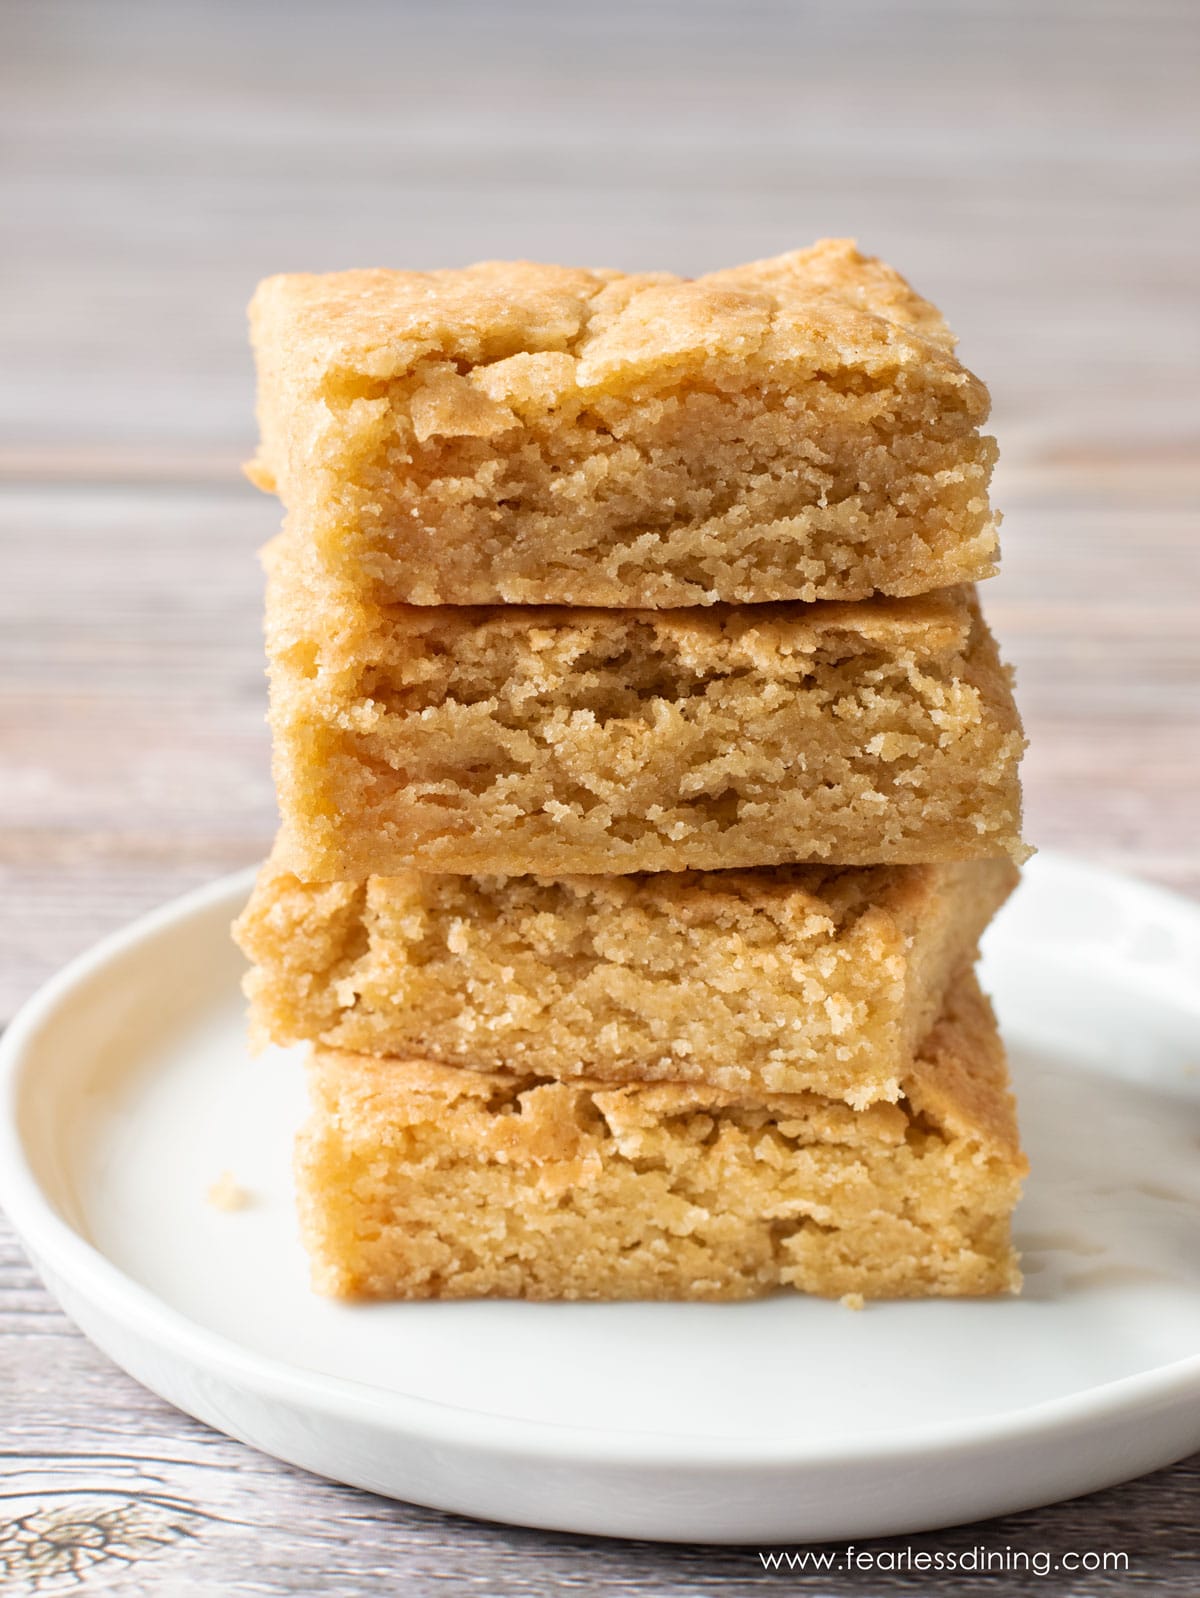 A stack of four gluten free butterscotch brownies on a plate.